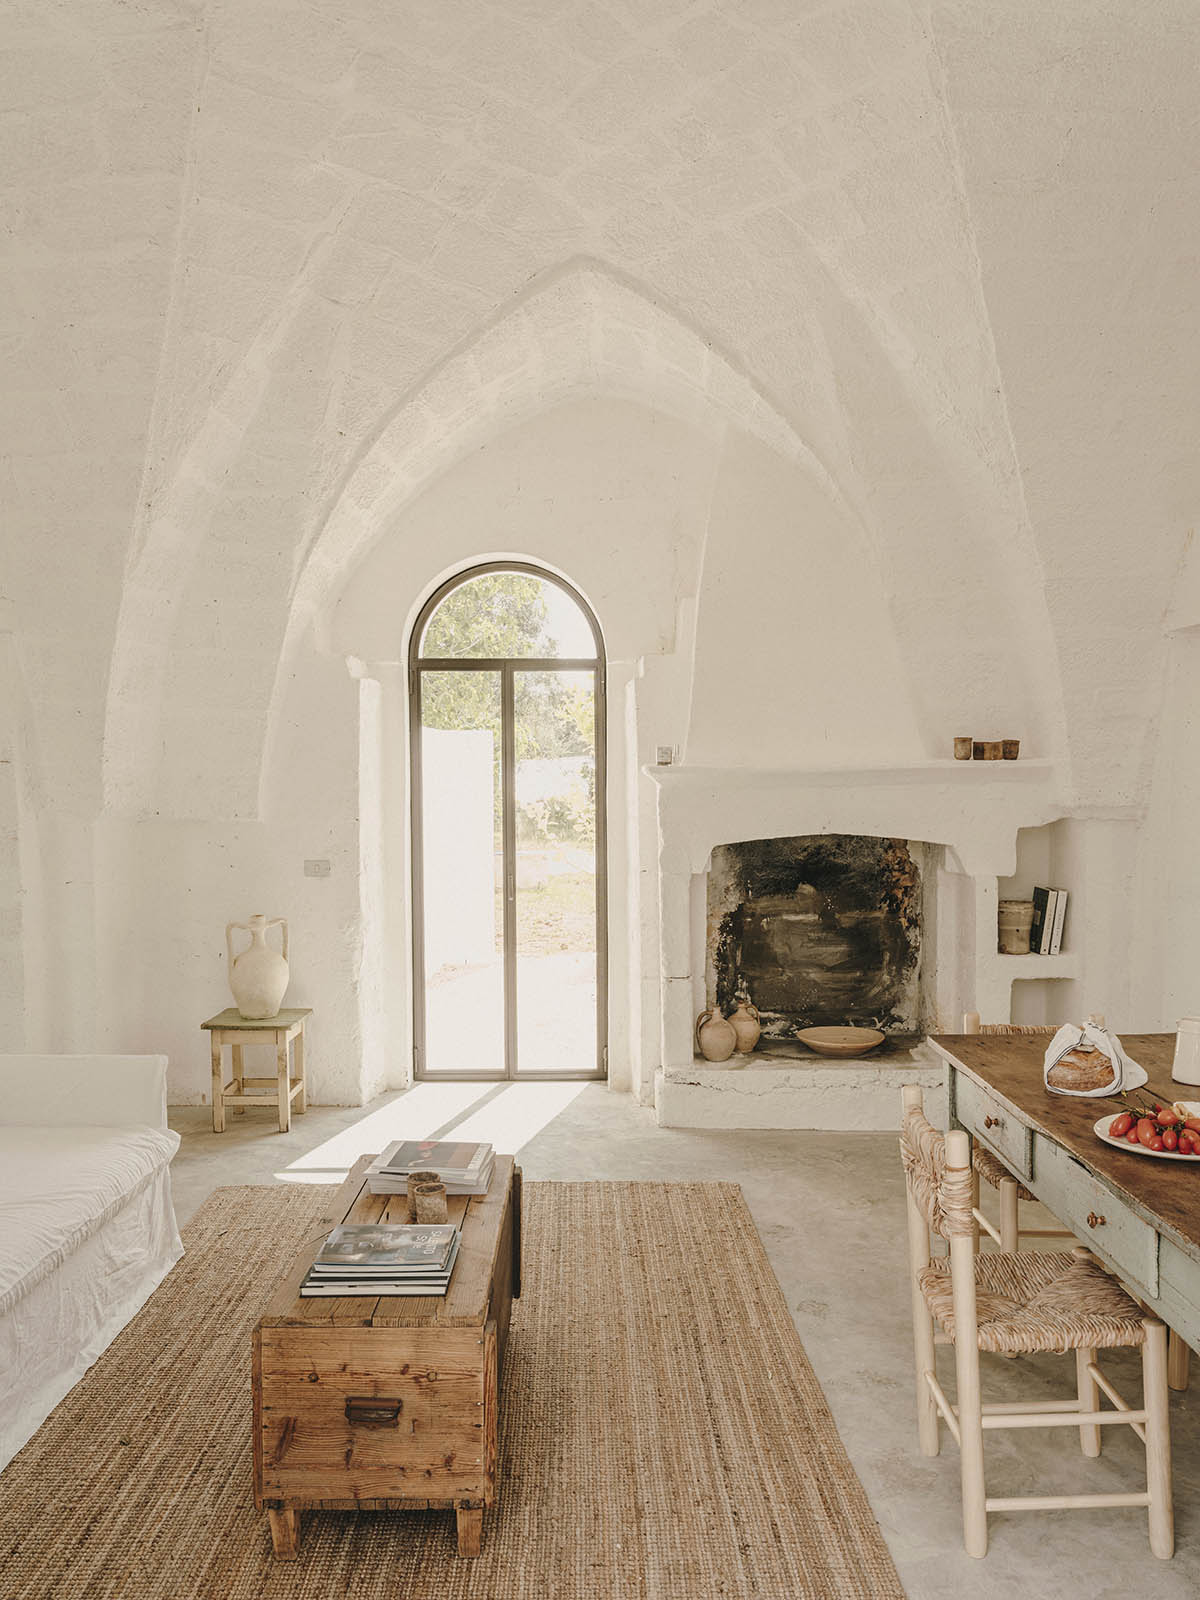 Studio Andrew Trotter converts three white stone country houses into bed and breakfast in Oria